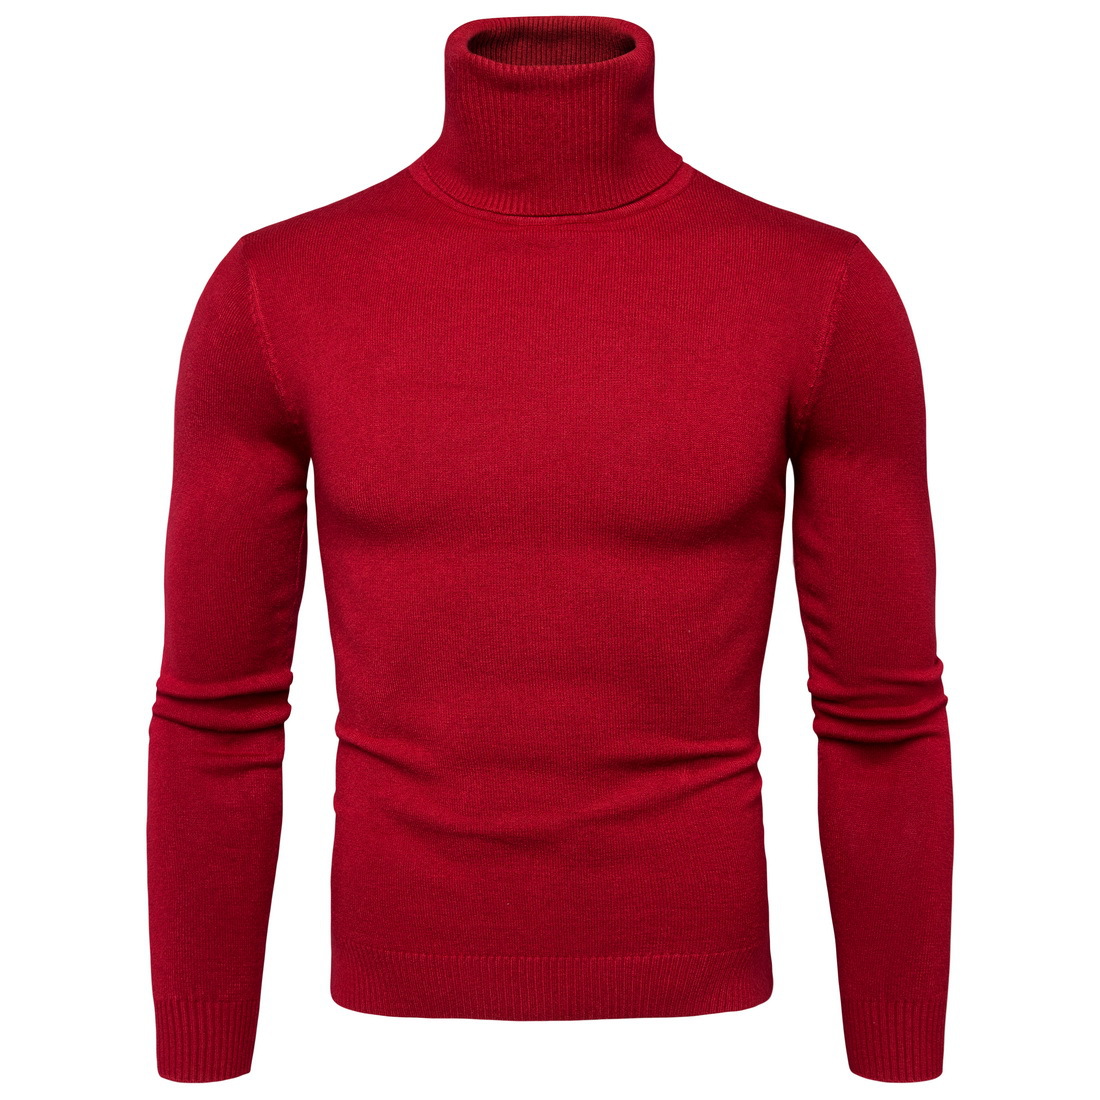  Men Knitted Sweater Autumn Winter Turtleneck Long Sleeve Casual Slim Pullover Tops red